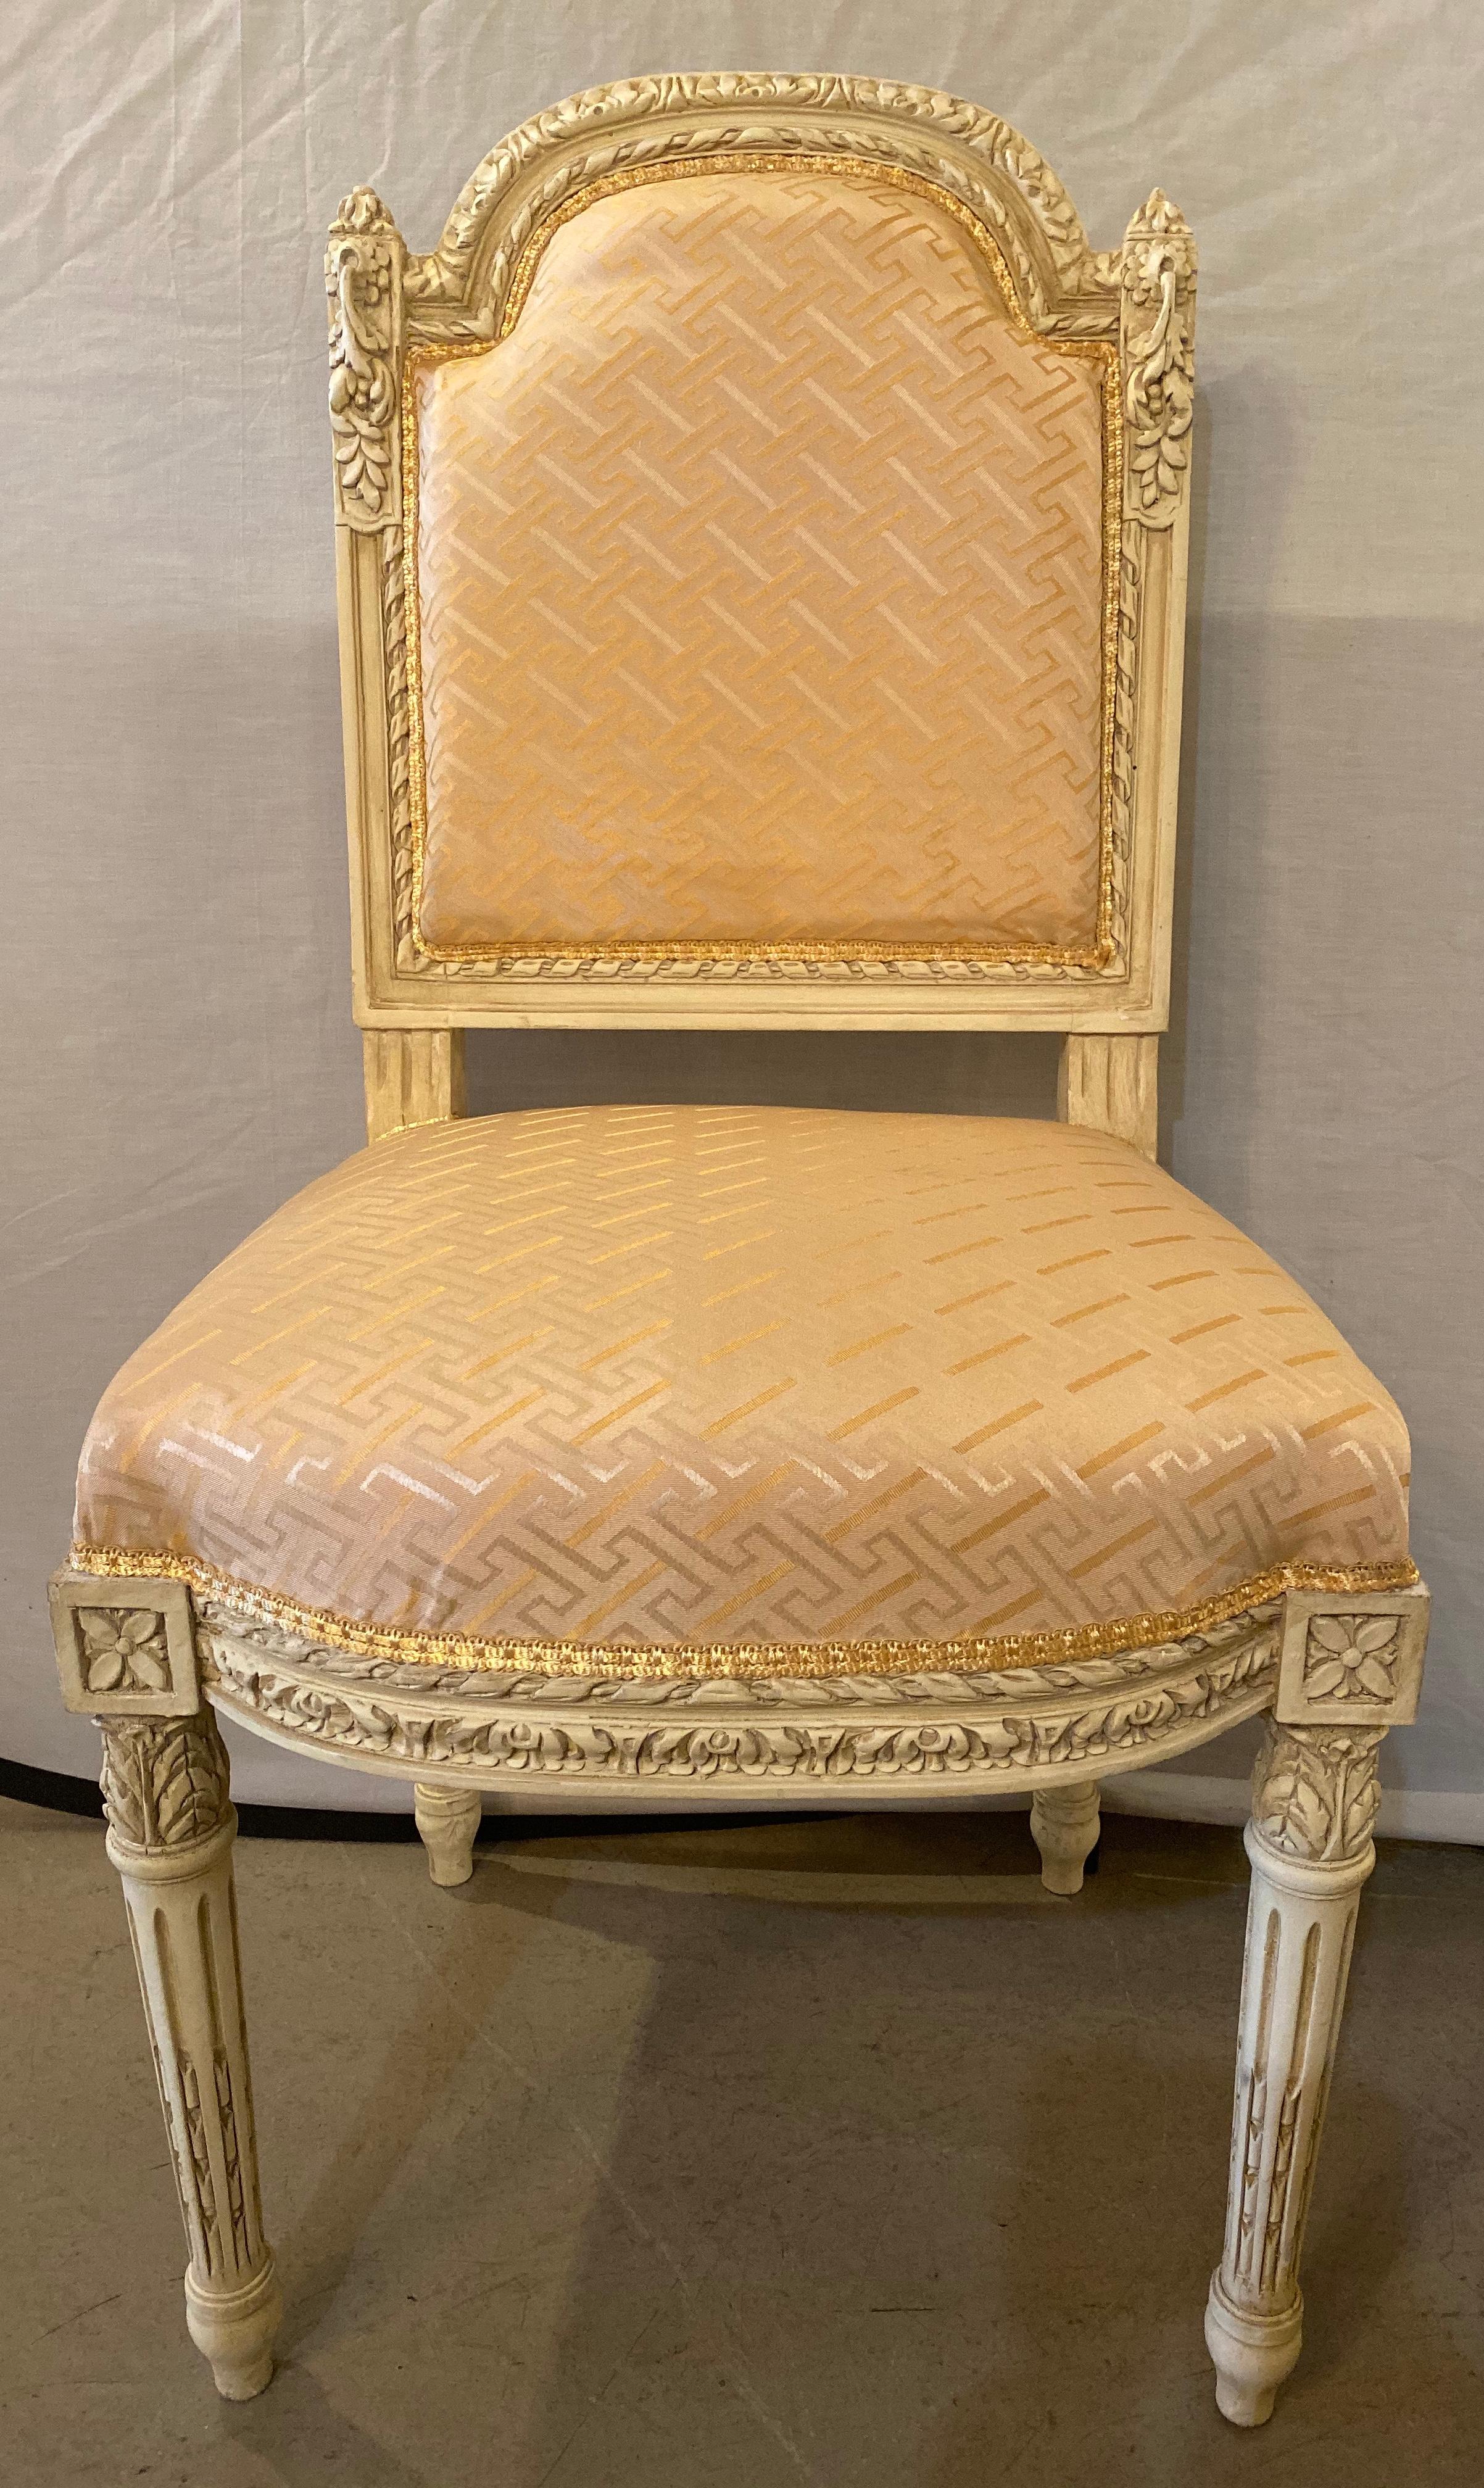 12 Swedish Louis XVI style dining / side chairs painted carved frames in a salmon satin new fabric
This stunning set of 12 dining chairs have been fully refinished and each are done in a fine new fabric. Each having a tapering carved group of legs